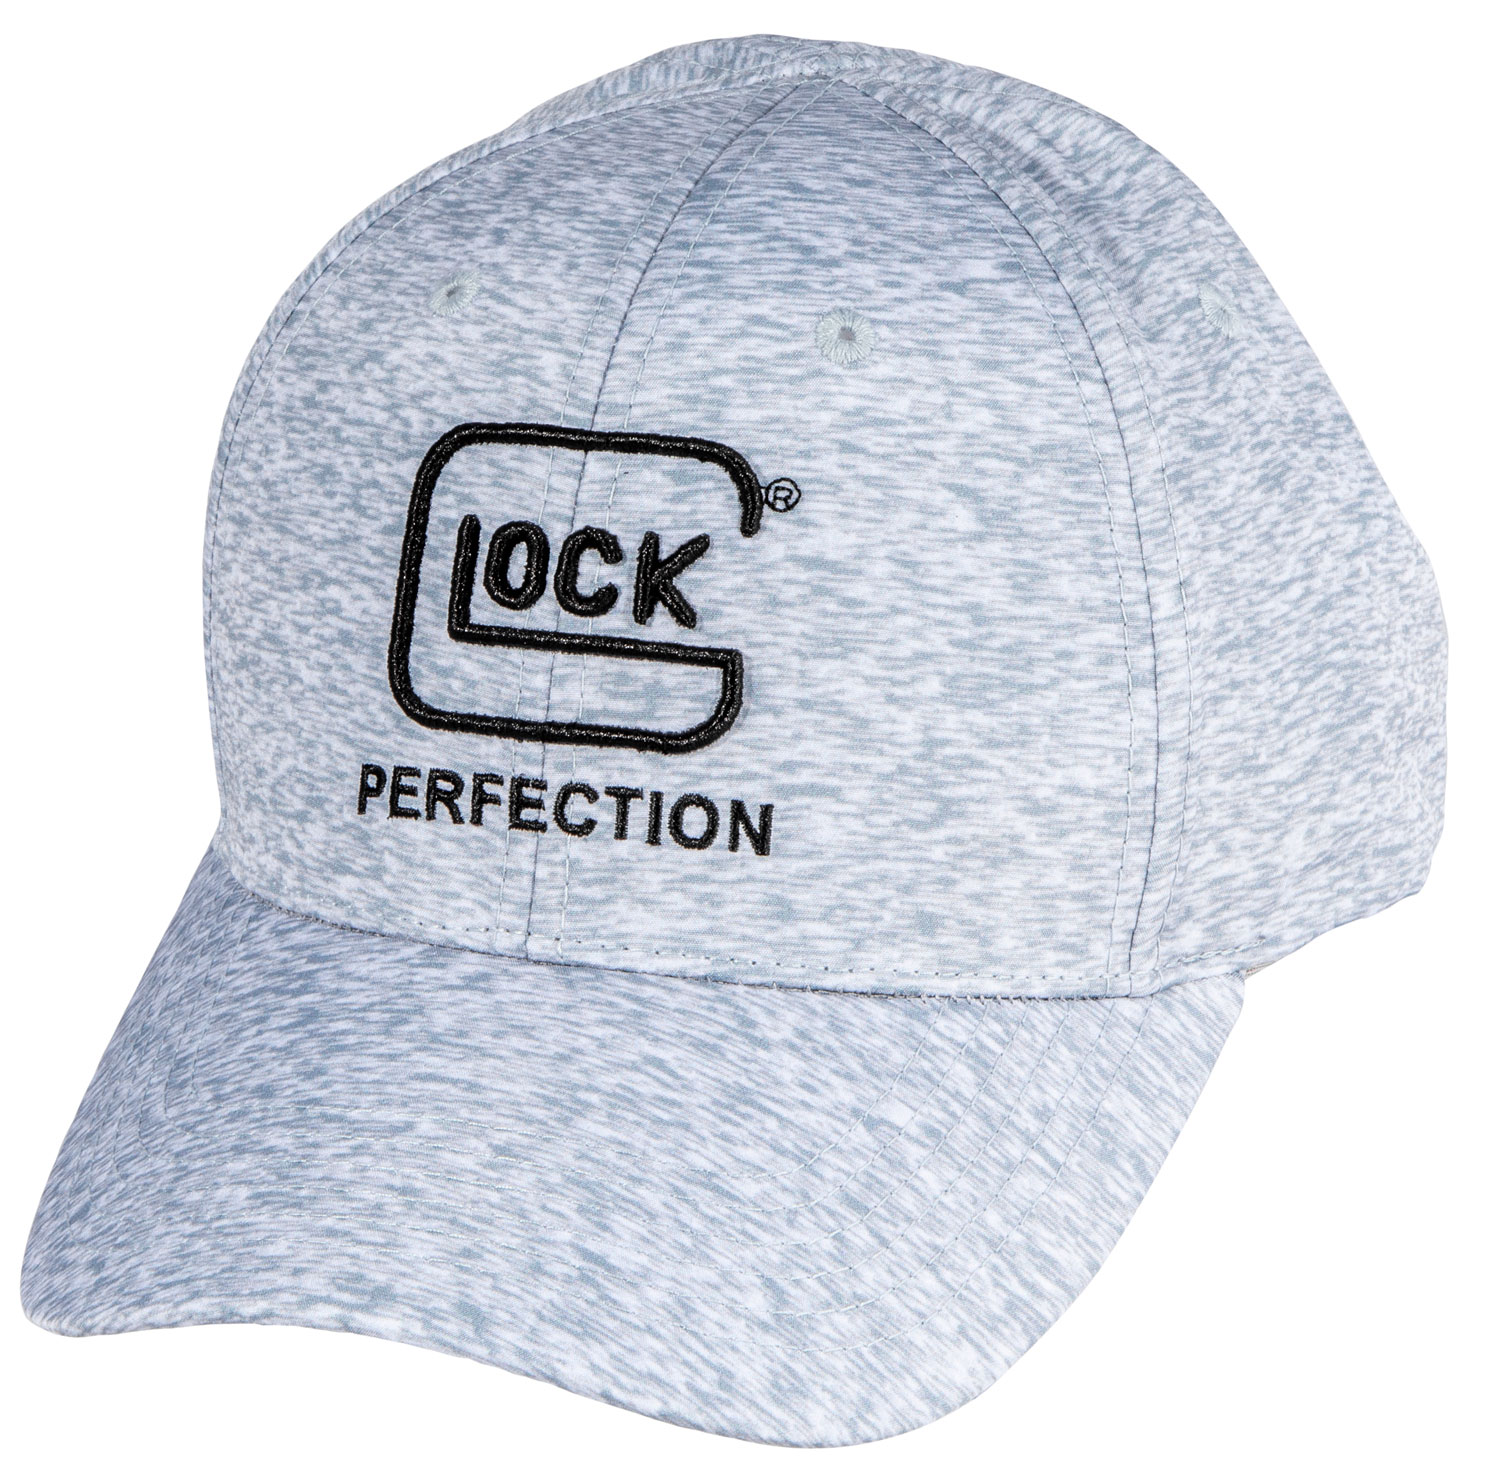 Glock AS10072 Space Dye  Solar Snapback Hat, Heather Gray, Embroidered Glock Perfection Logo